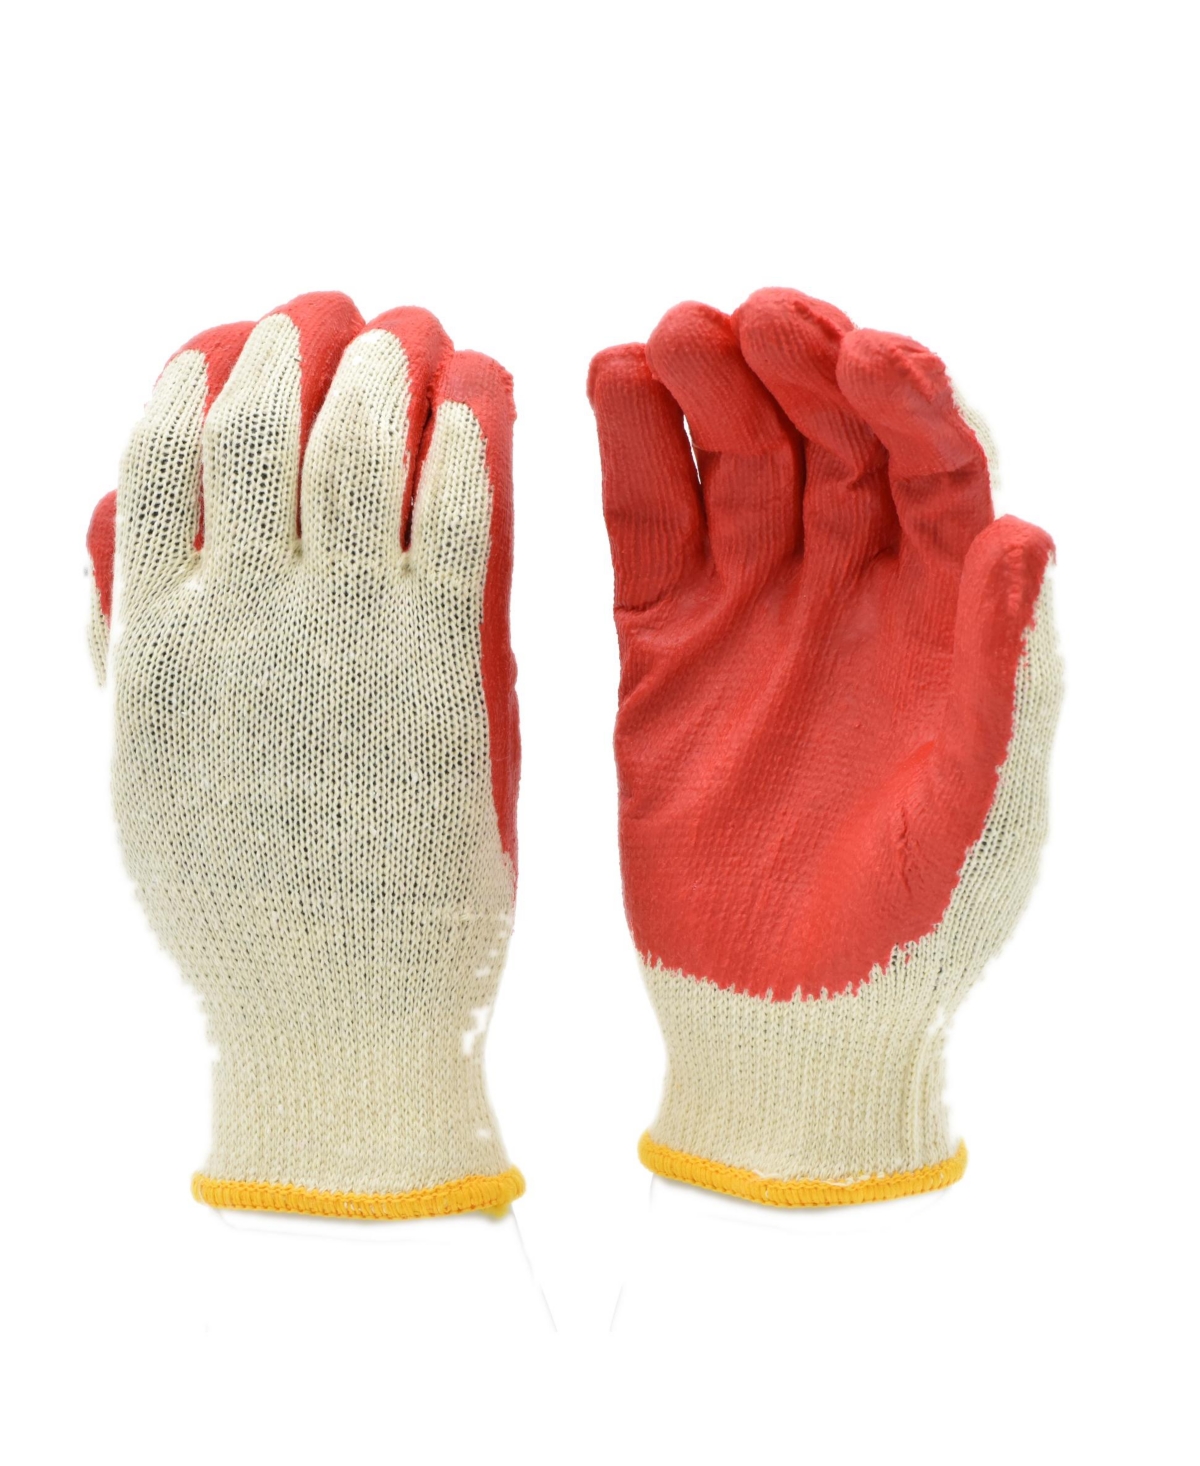 Latex Dipped Work Gloves, 10 Pairs - Red